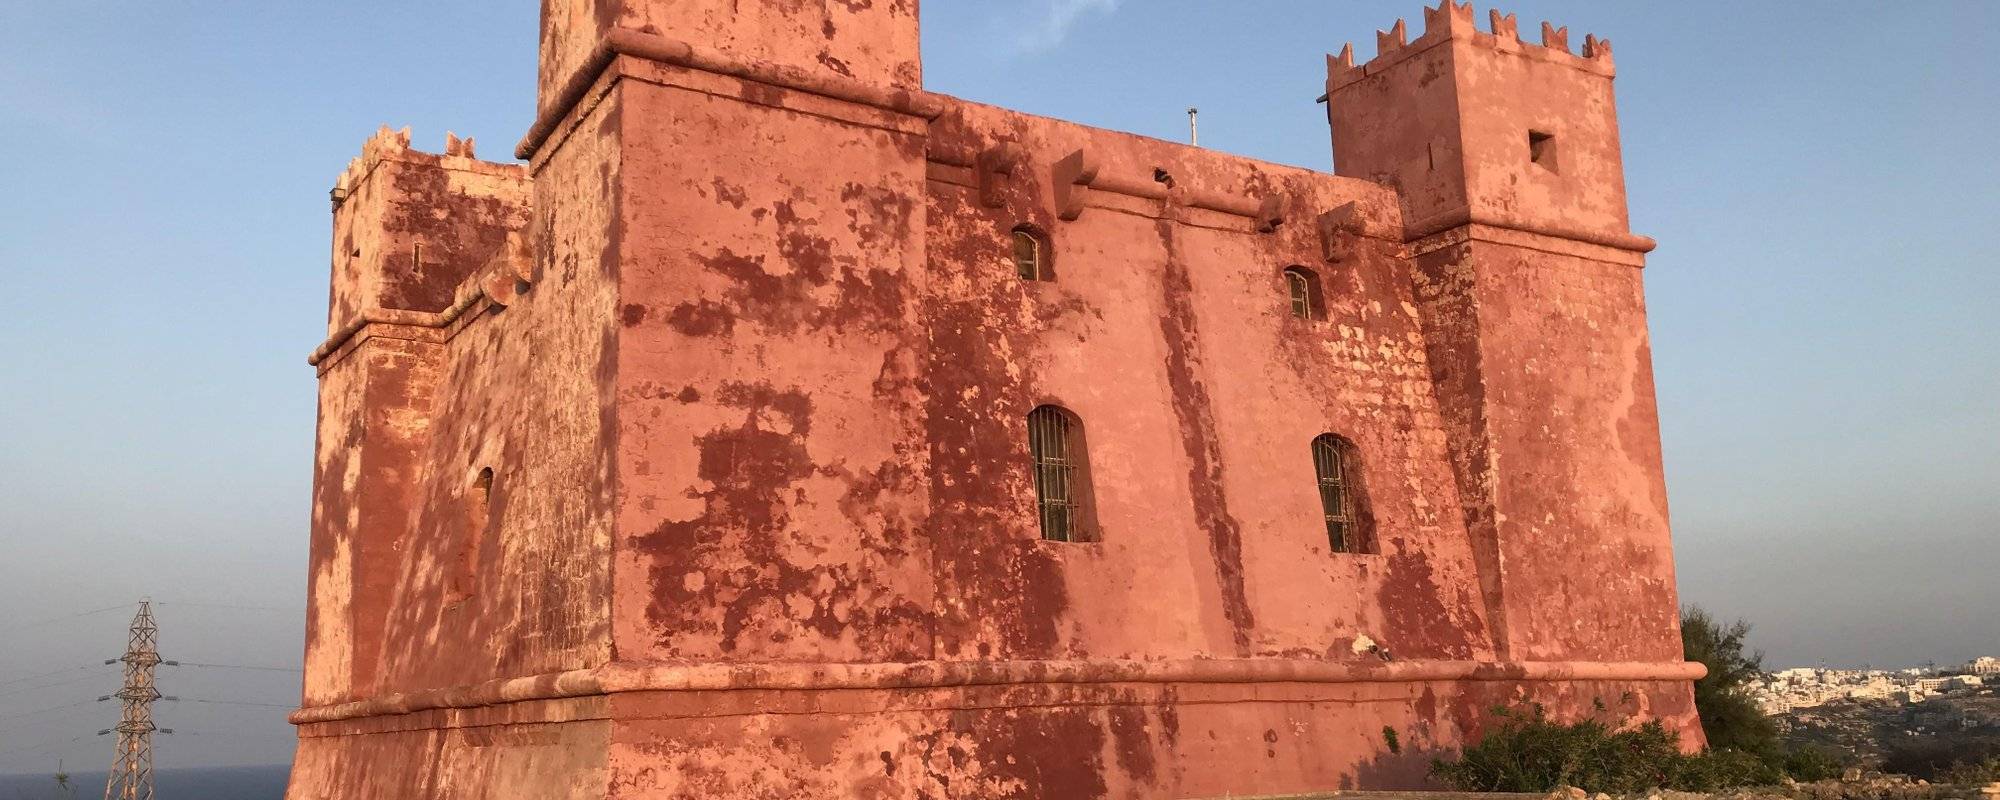 Exploring Malta: The Red Tower and Fort Campbell